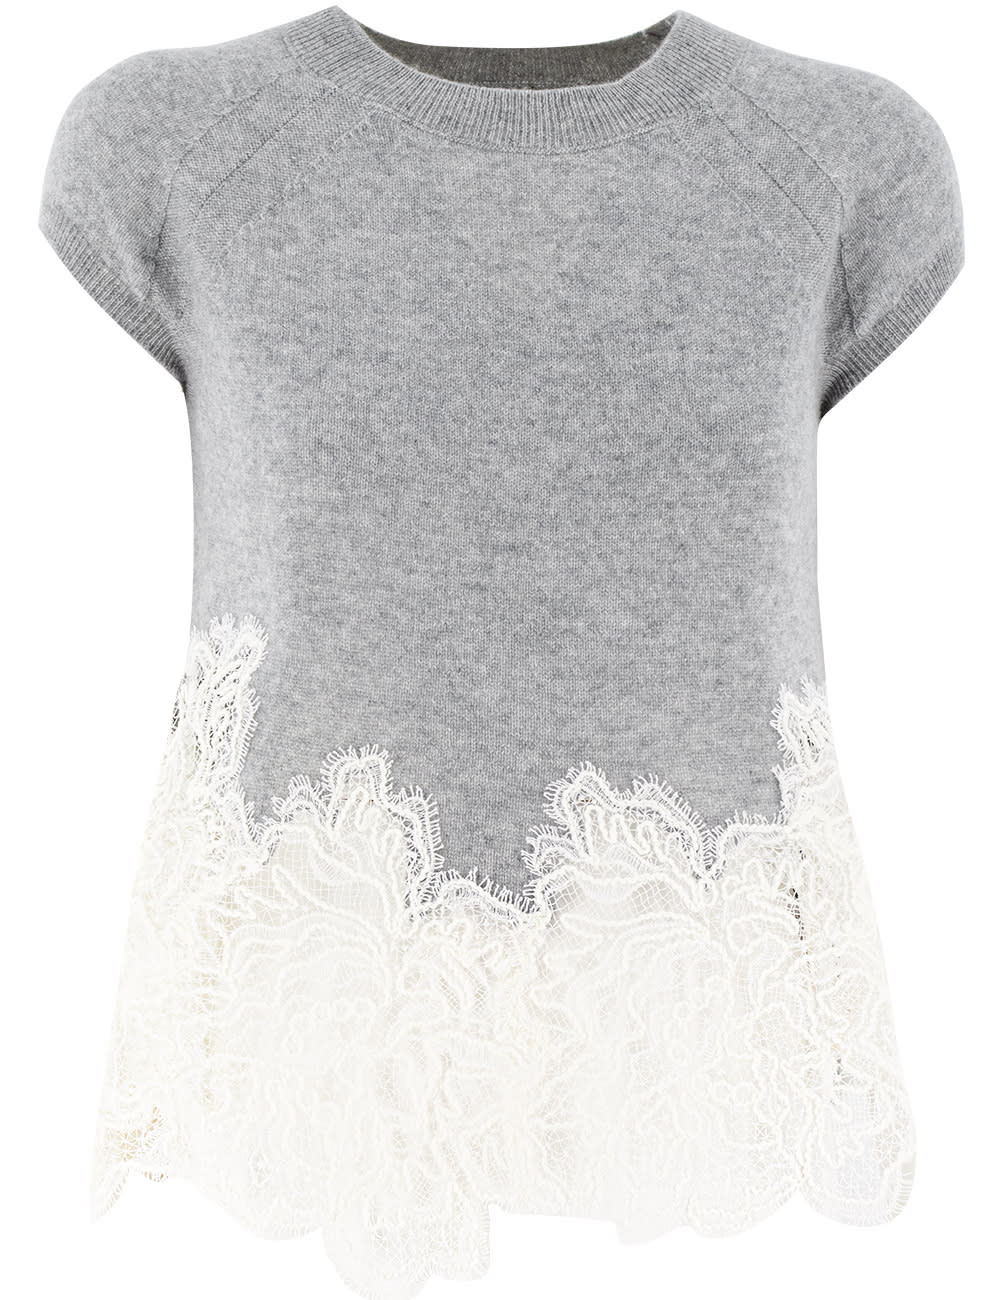 Grey Cashmere Top With Lace Insert